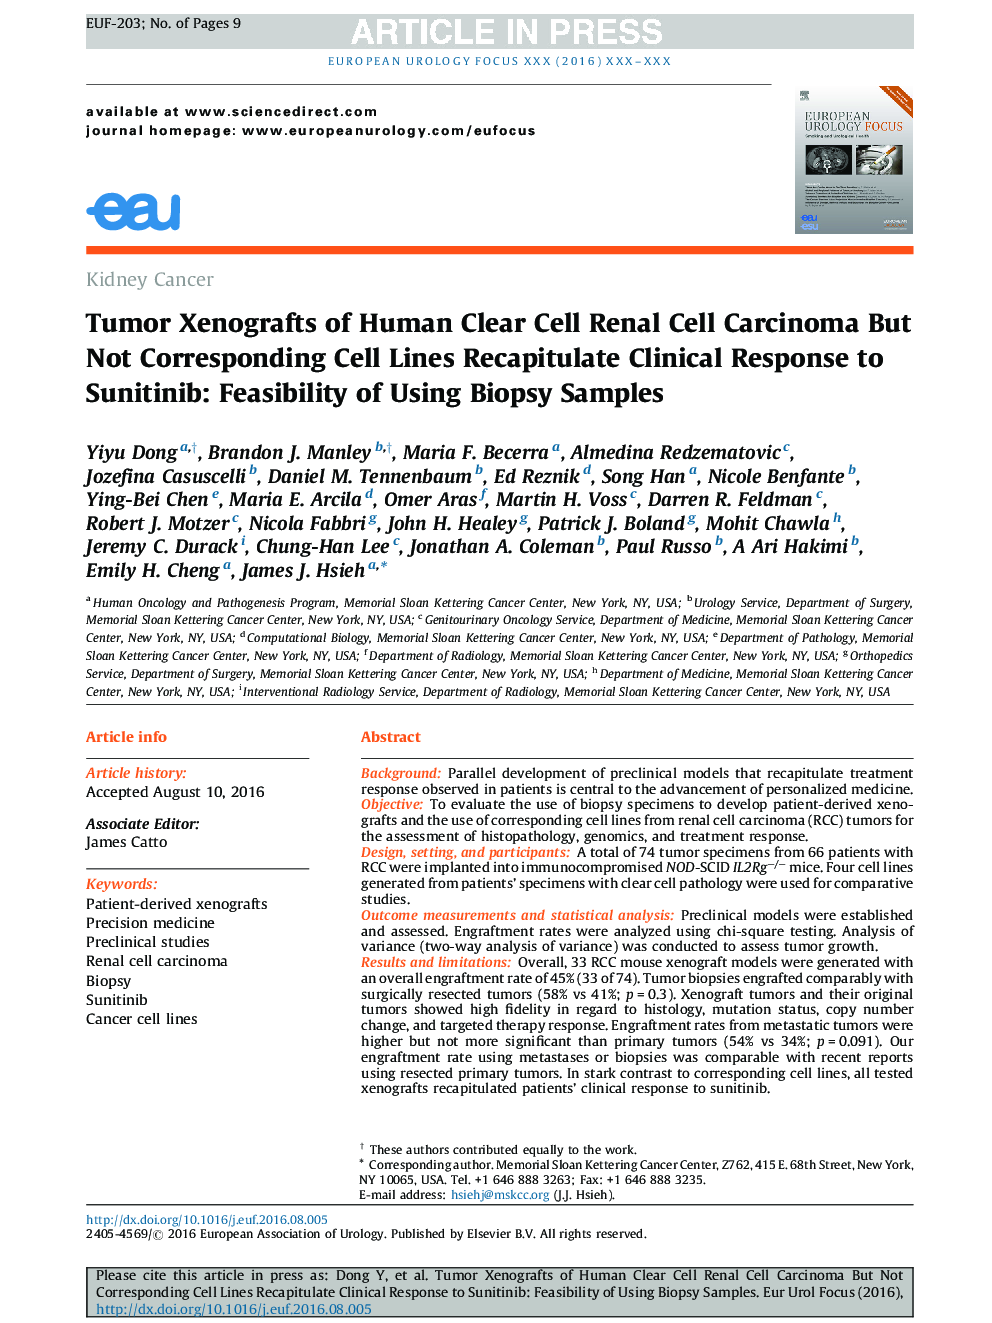 Tumor Xenografts of Human Clear Cell Renal Cell Carcinoma But Not Corresponding Cell Lines Recapitulate Clinical Response to Sunitinib: Feasibility of Using Biopsy Samples